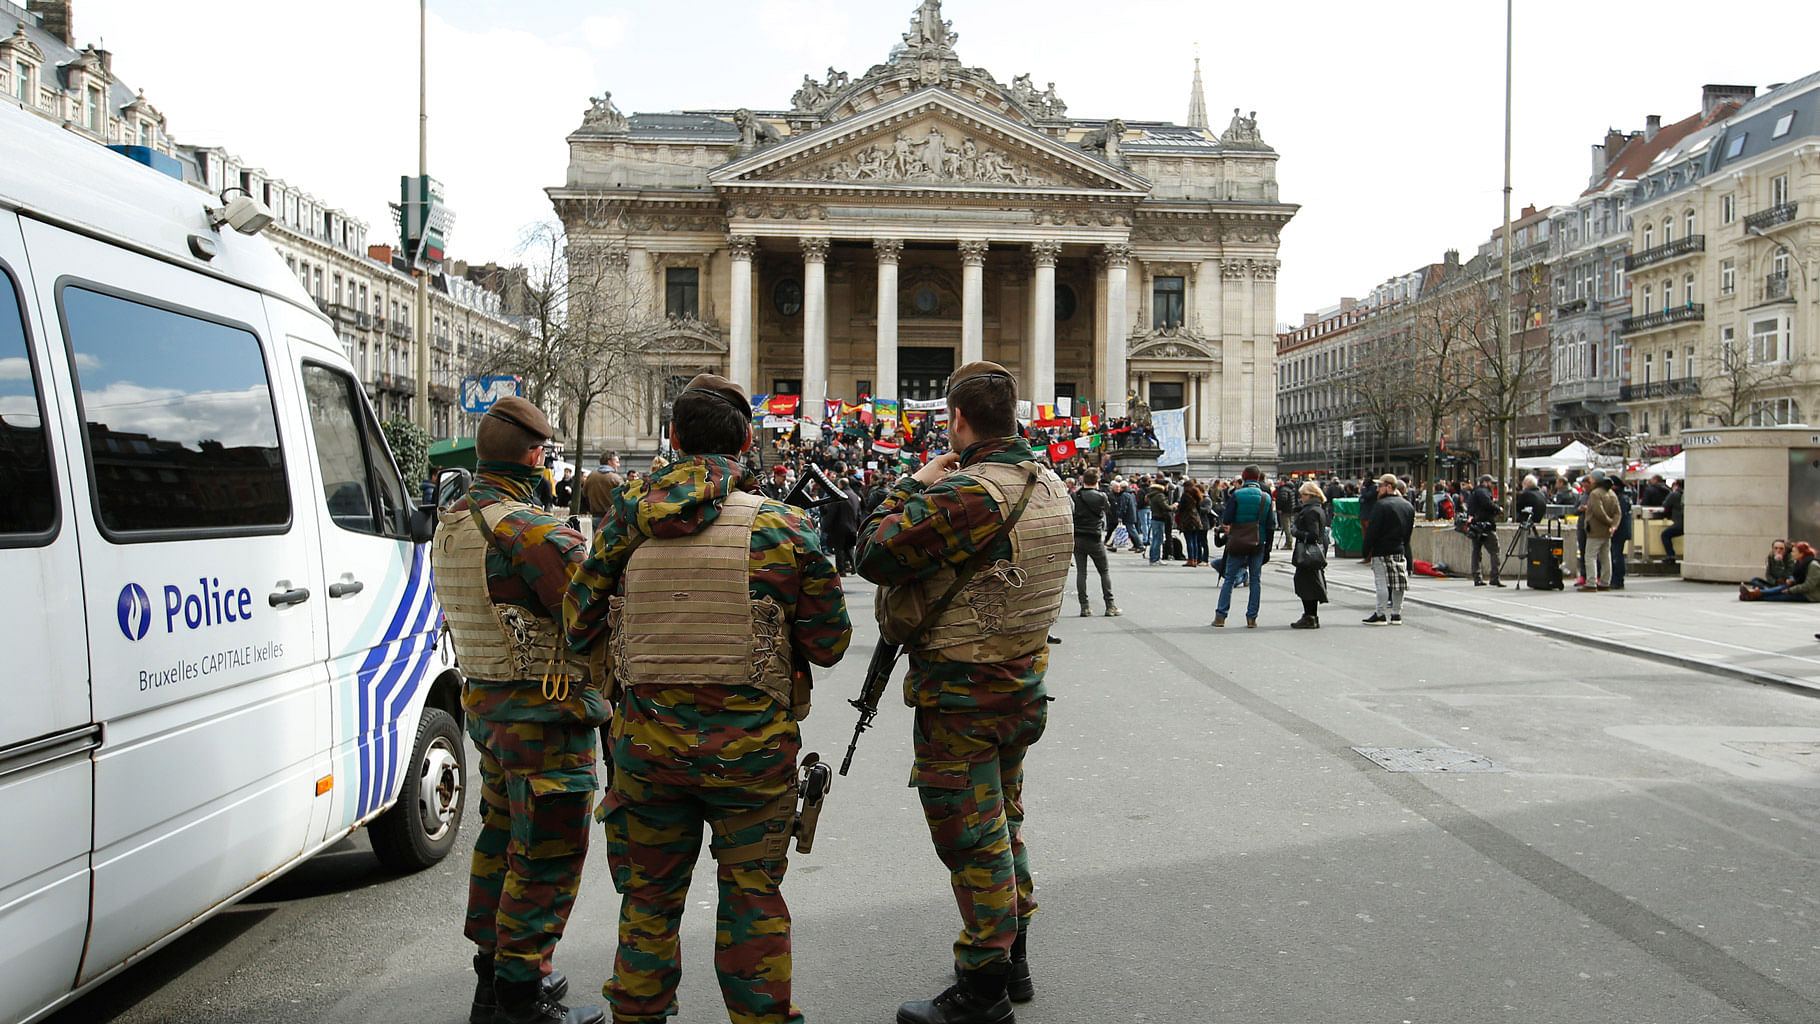 

Belgian soldiers stand guard next to one of the memorials to the victims of the recent Brussels attacks, at the Place de la Bourse in Brussels, March, 27, 2016. (Photo: AP)